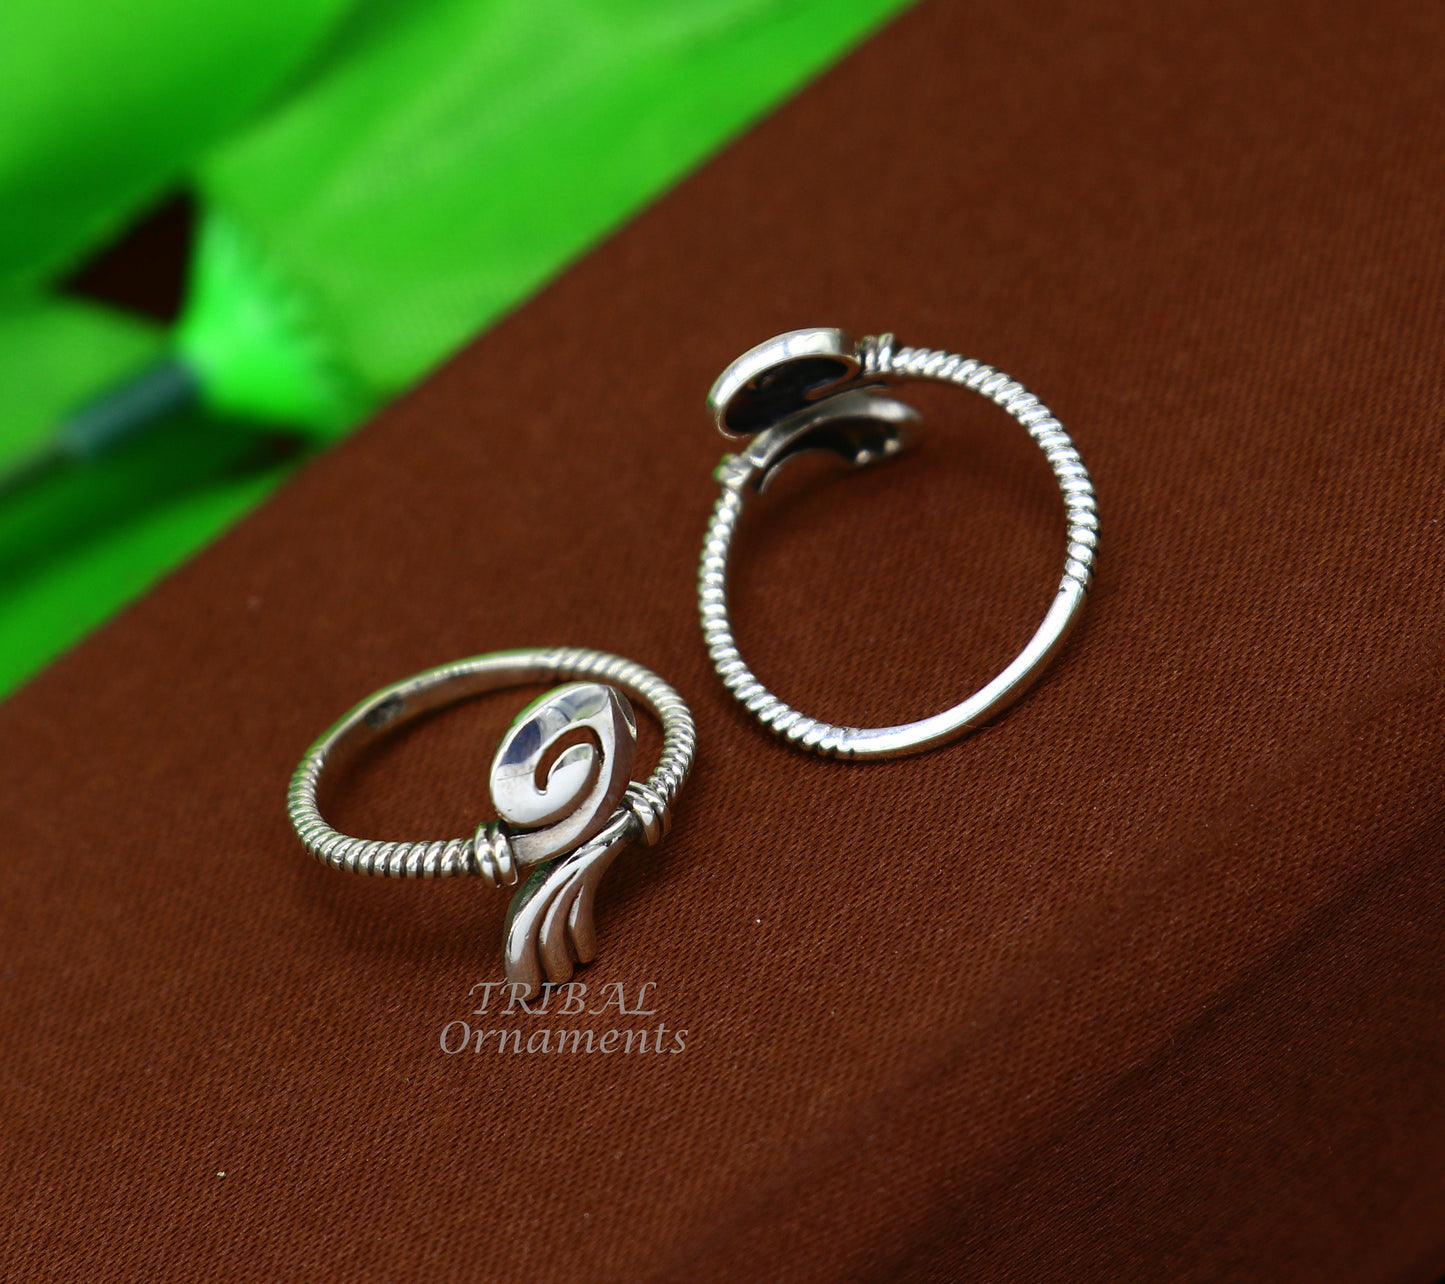 925 sterling silver uniquely handcrafted unique style antique look toe rings. best brides wedding jewelry ethnic  tribal jewelry ytr18 - TRIBAL ORNAMENTS